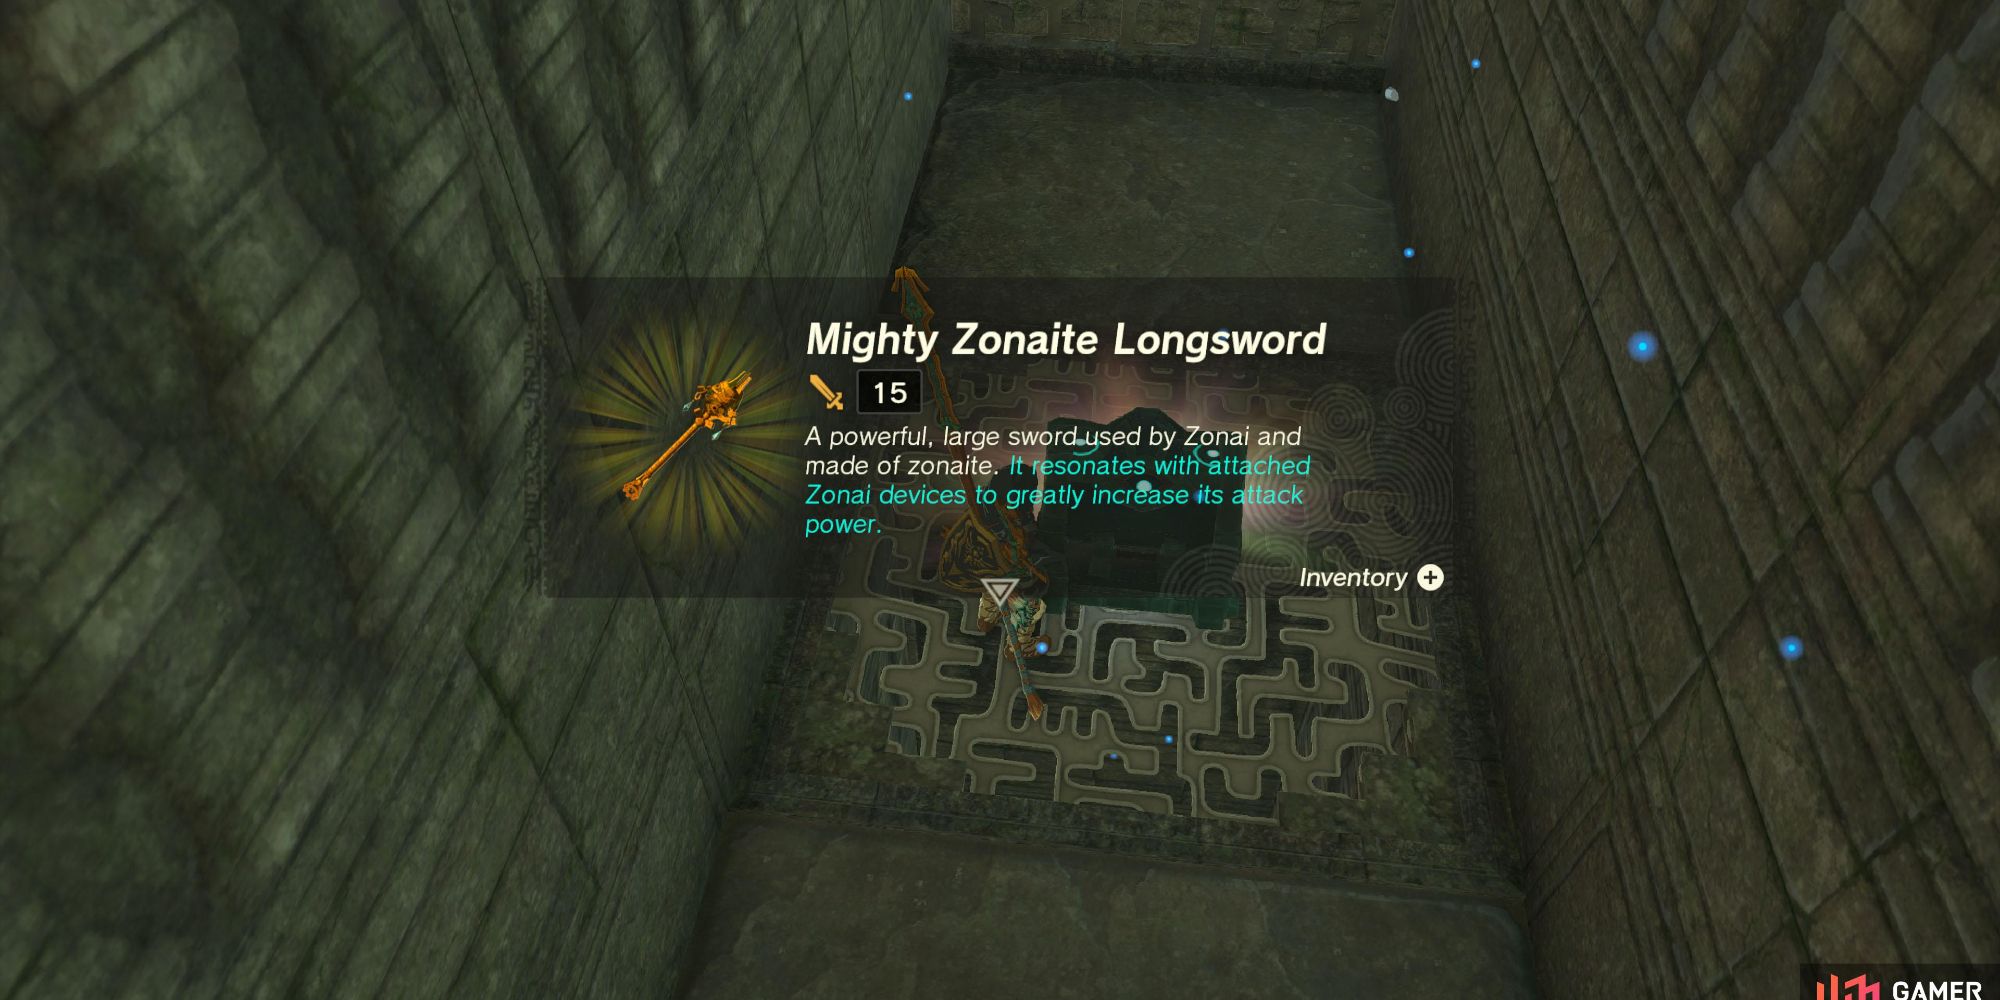 Link finding a Mighty Zonaite Longsword in a chest